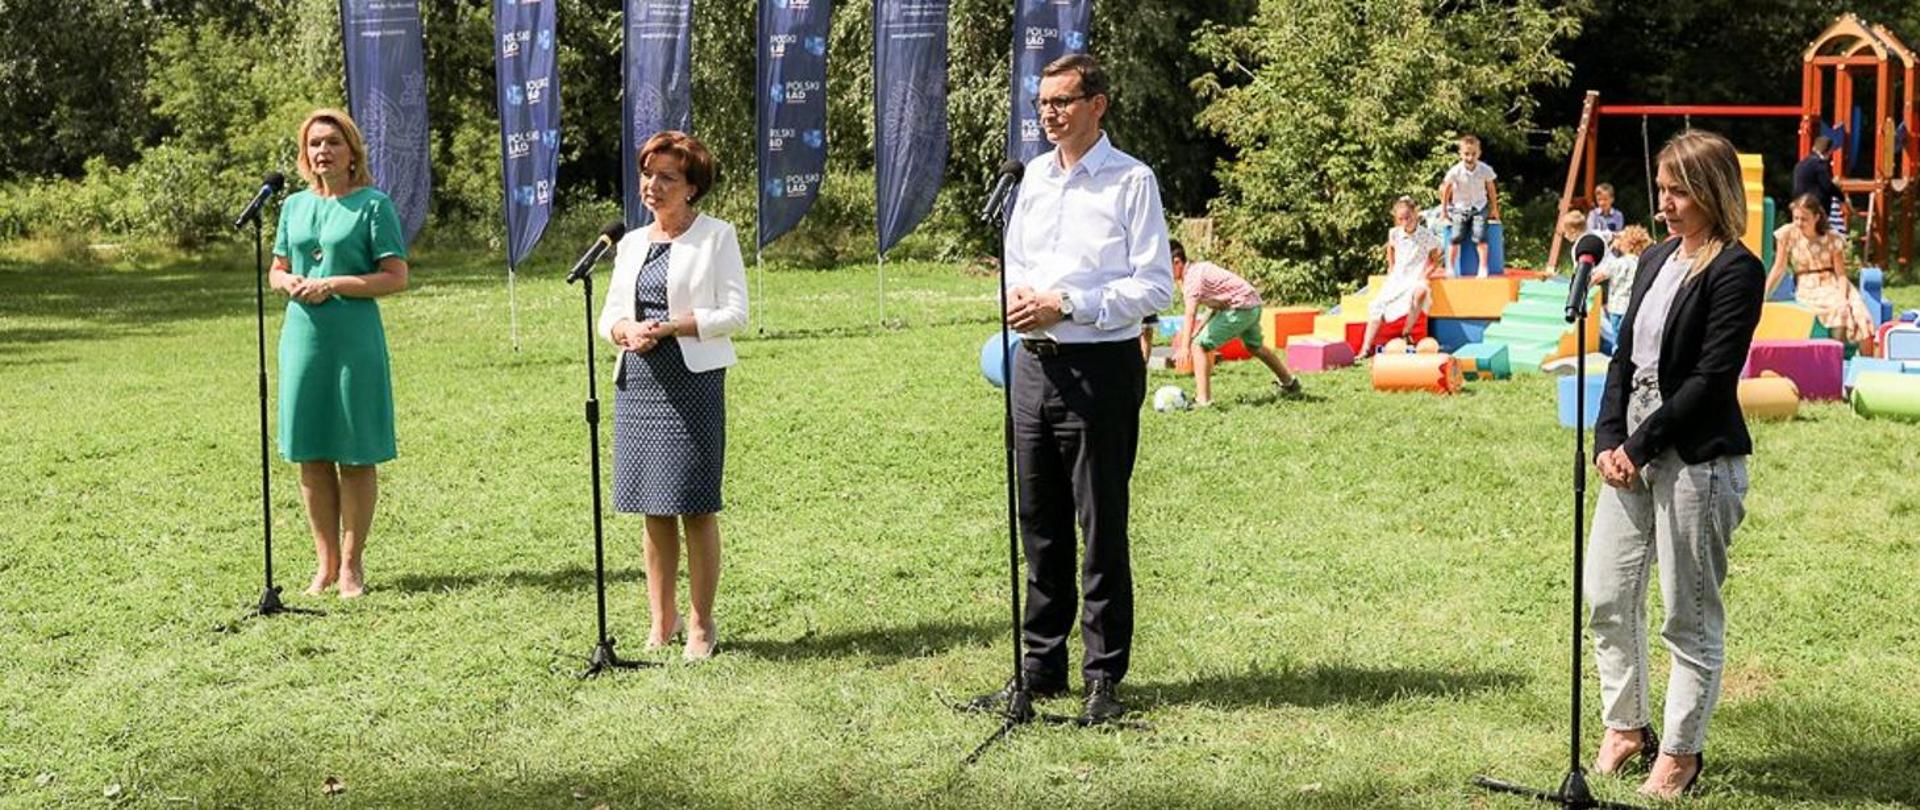 Prime Minister Mateusz Morawiecki together with the Minister of Family and Social Policy Marlena Maląg